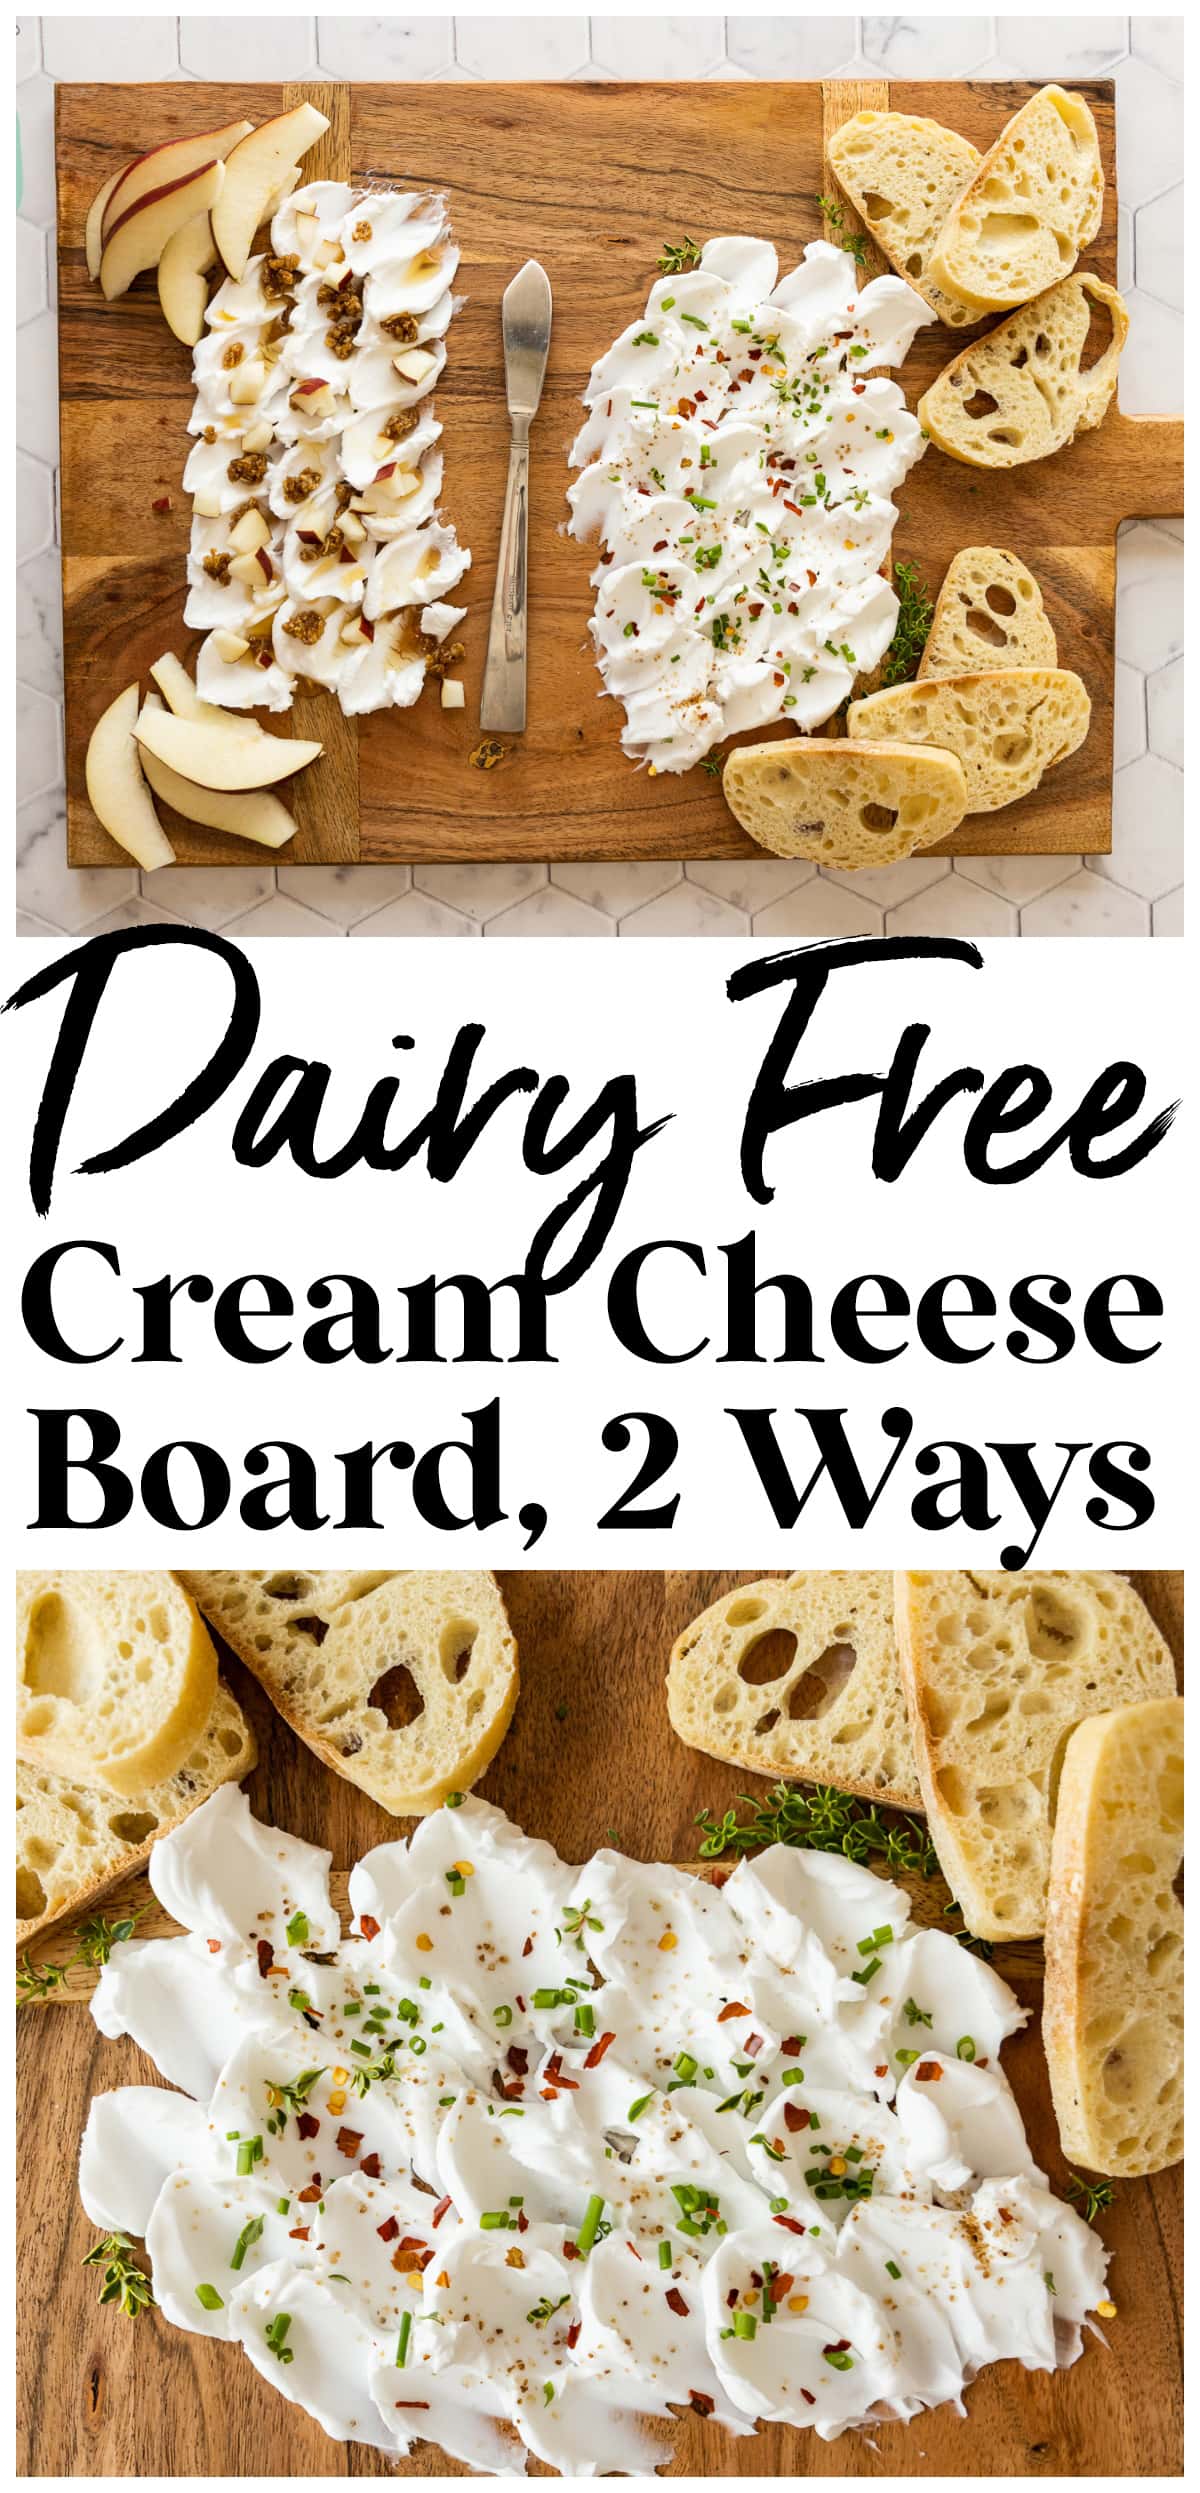 photo collage showing 2 different kinds of dairy free cream cheese spread on a wood board. 